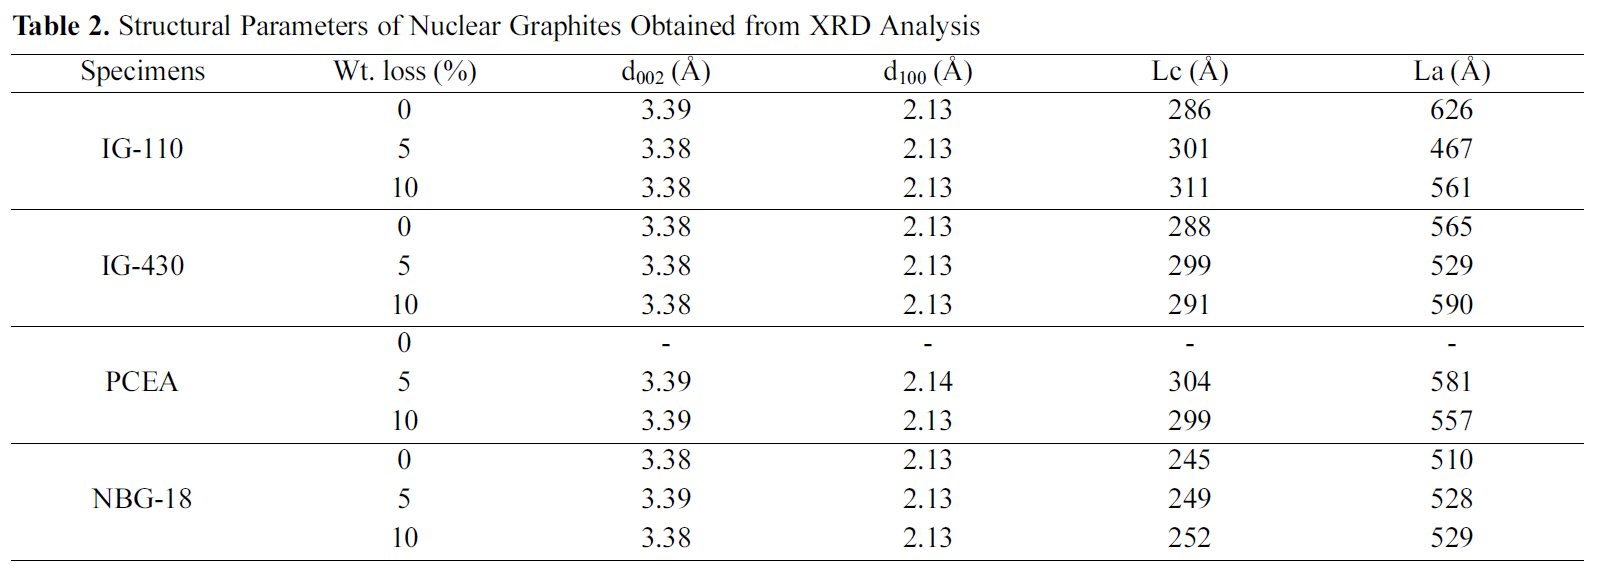 Structural Parameters of Nuclear Graphites Obtained from XRD Analysis